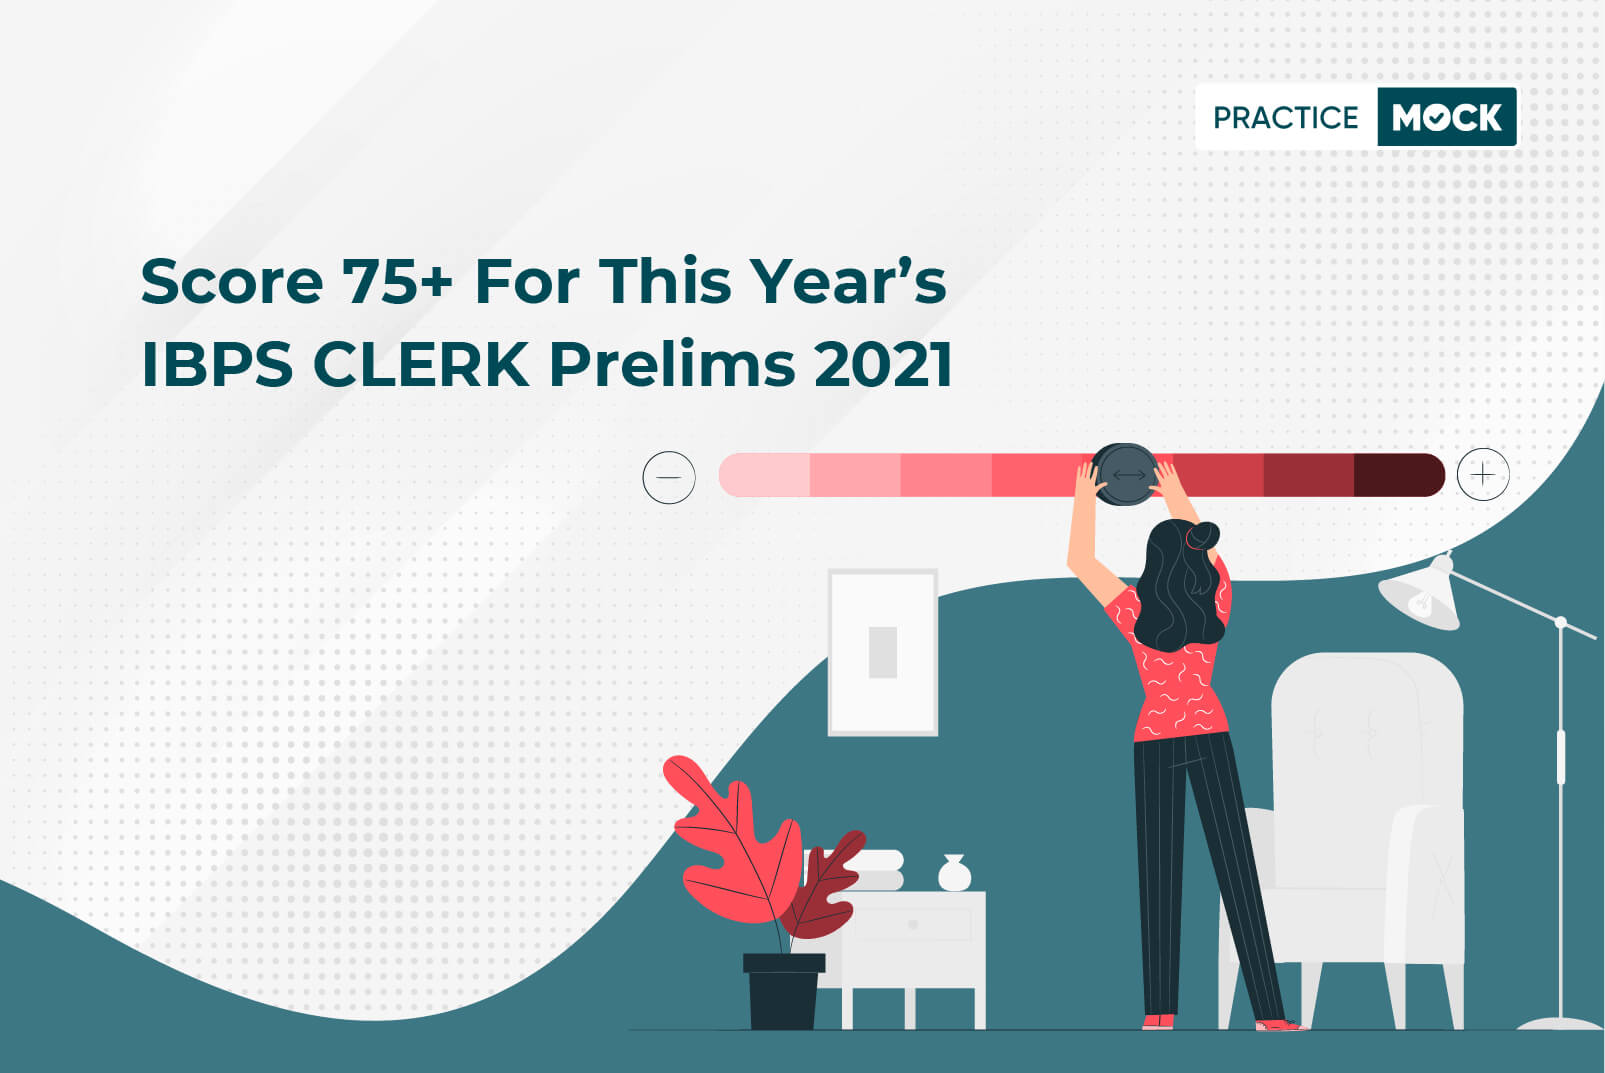 Score 75+ for this year’s IBPS Clerk Prelims